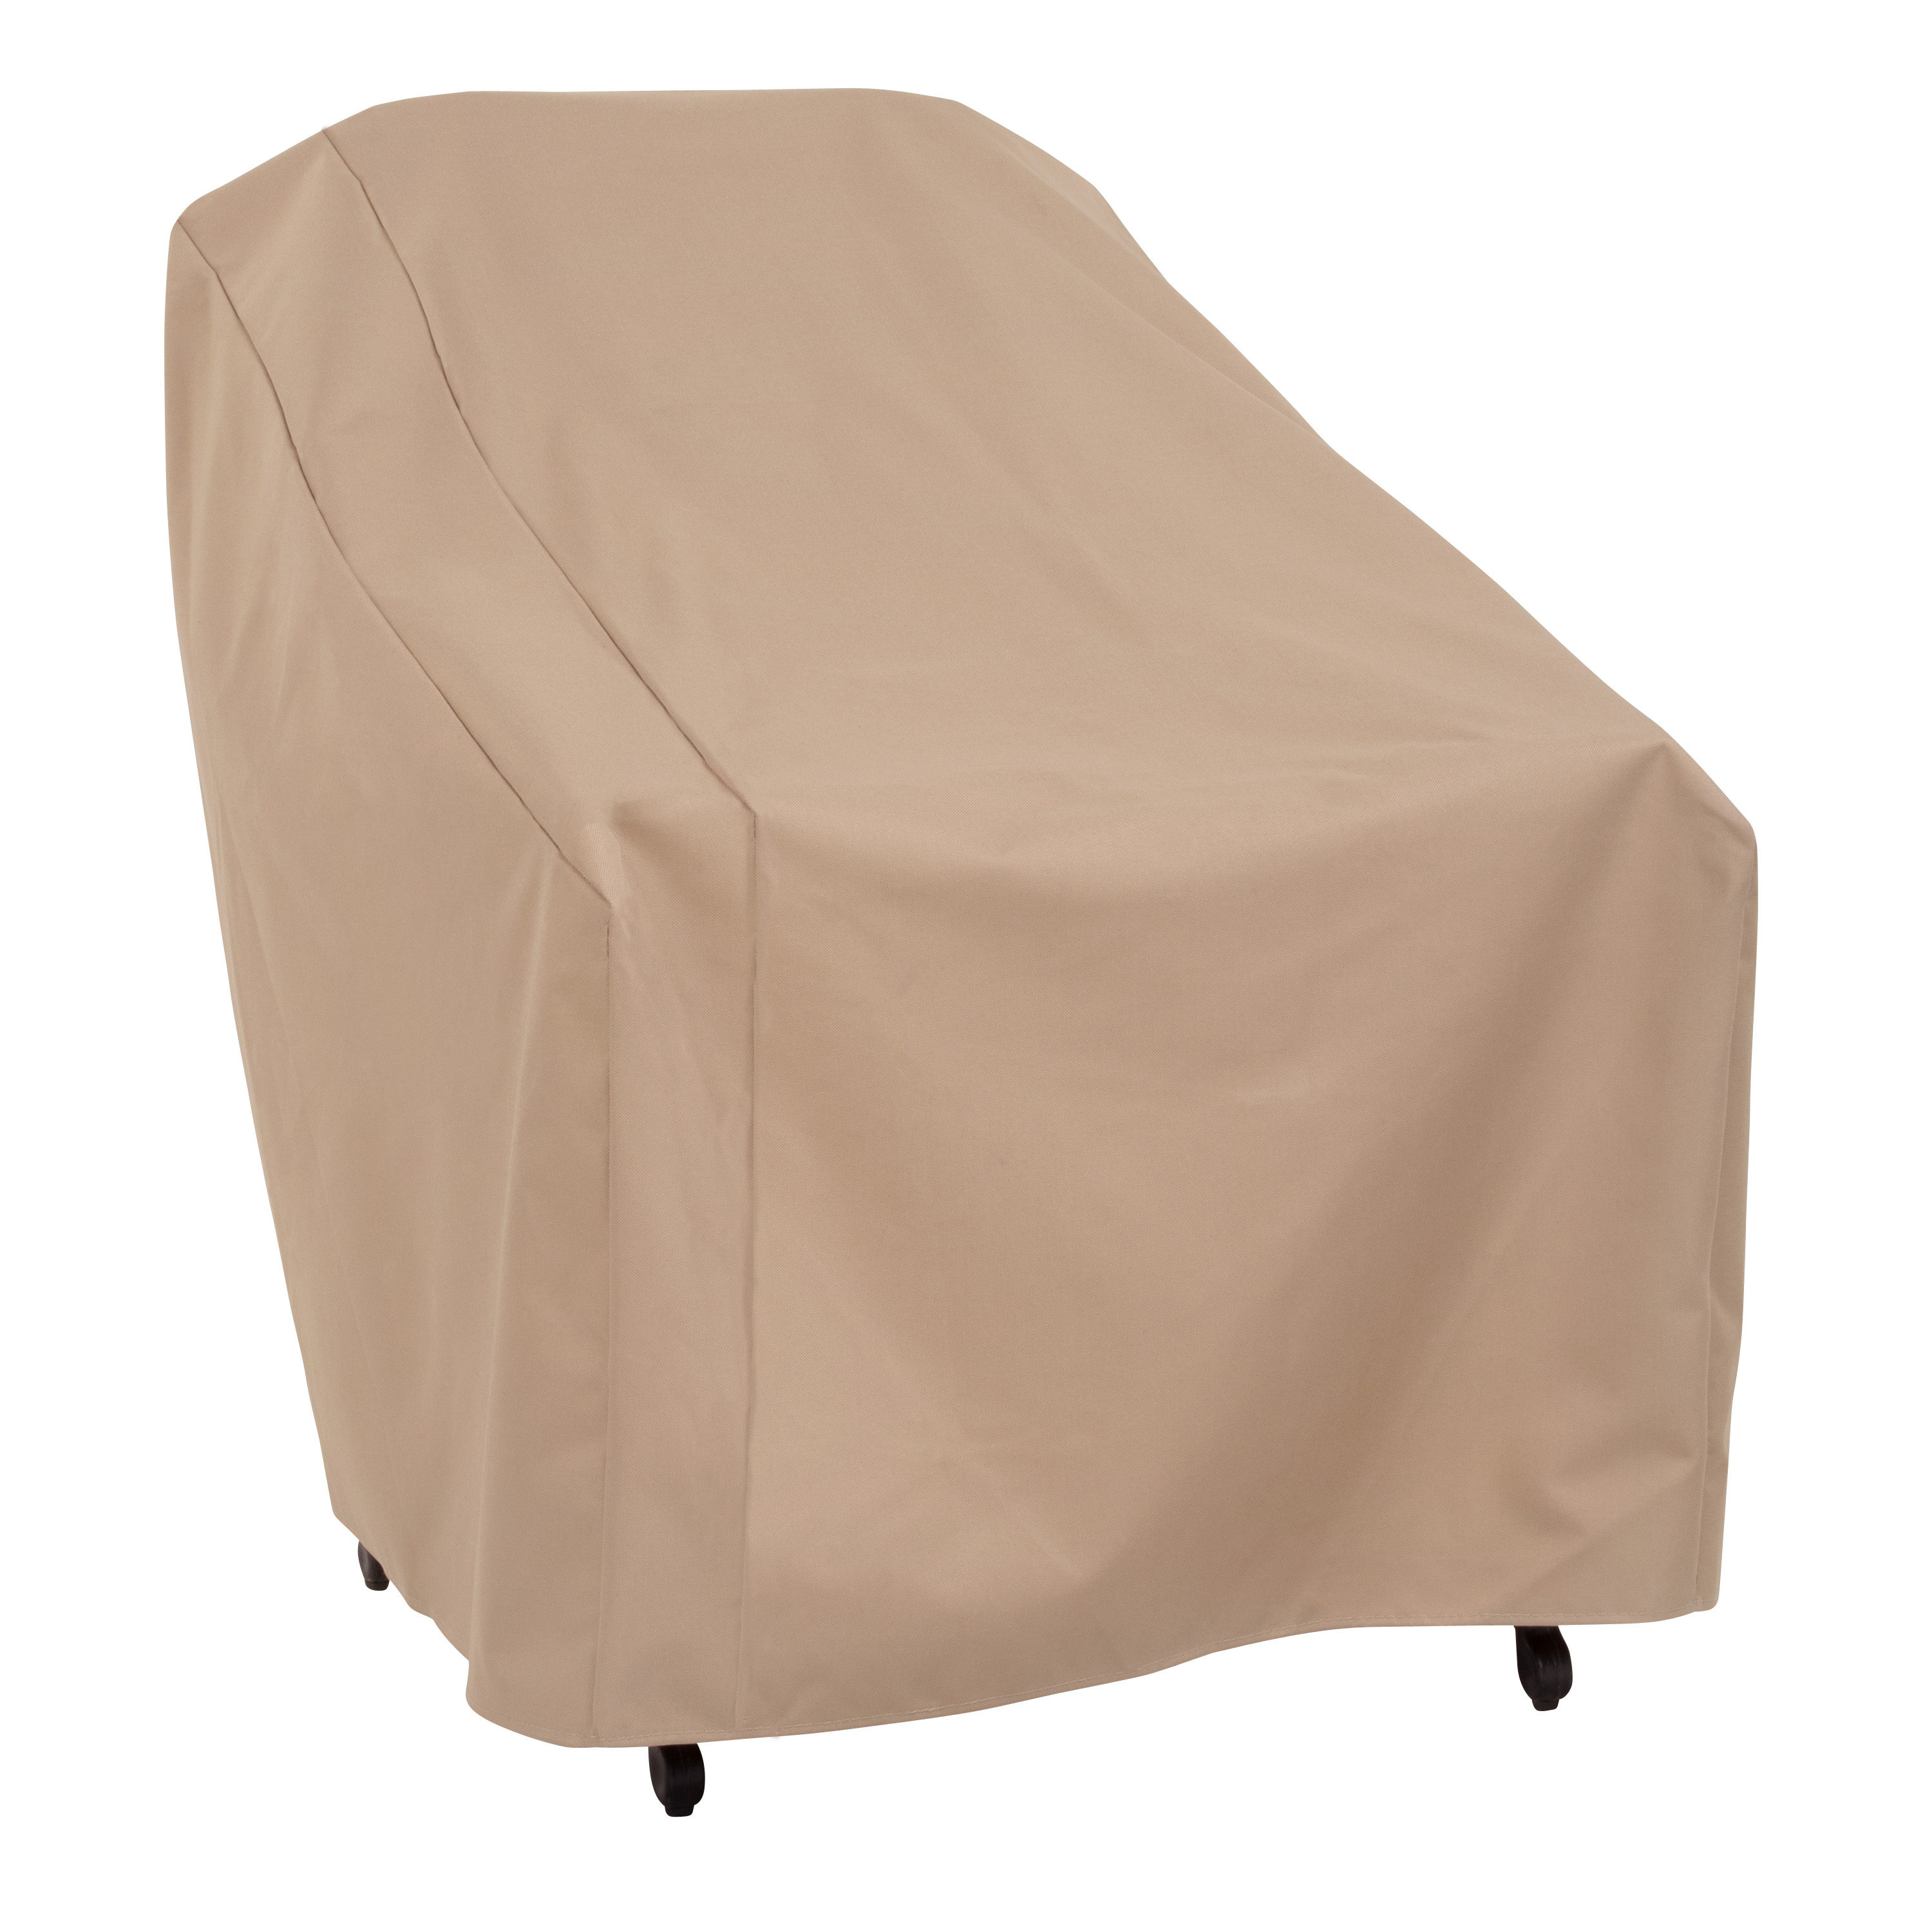 Vailge Waterproof Patio Chaise Lounge Cover 600D Heavy Duty Outdoor Lounge Chair Covers,UV Resistant Patio Furniture Covers,2 Pack-Large,Beige & Brown 